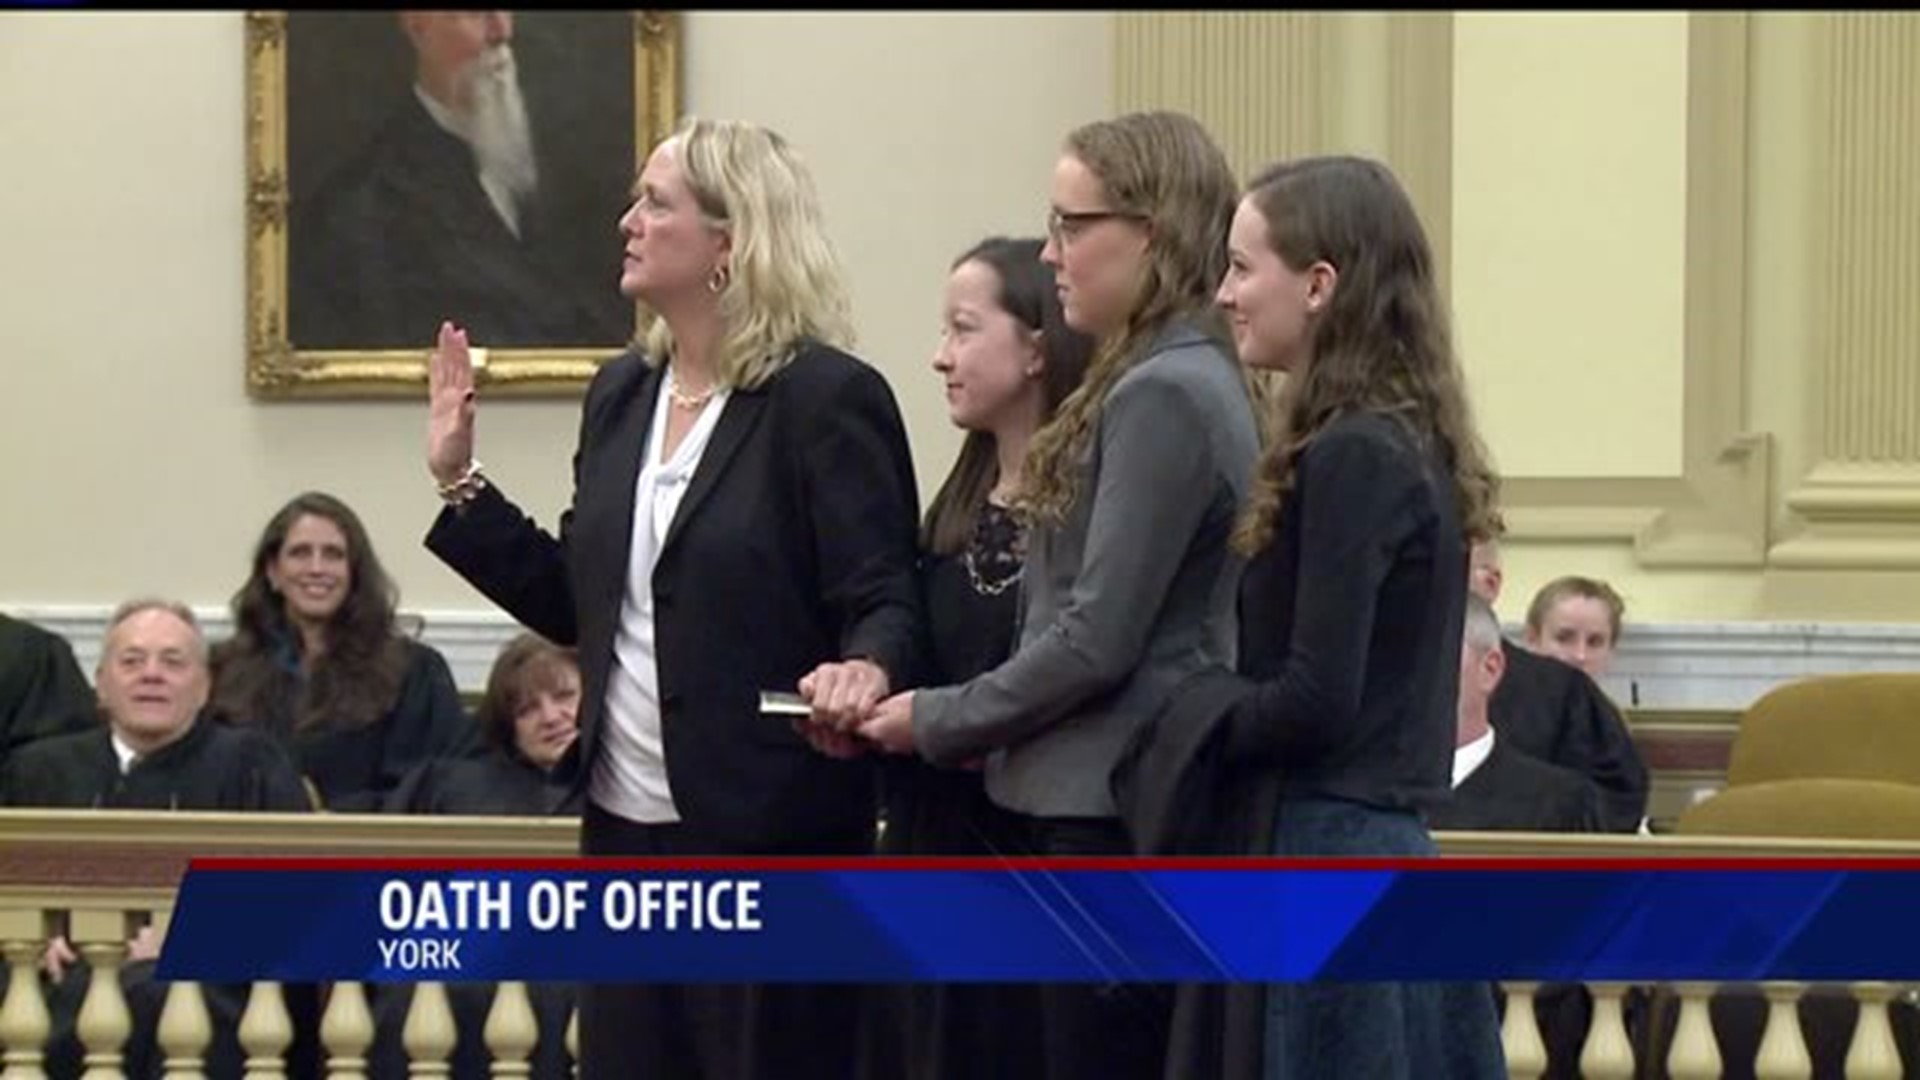 19 new officials take oaths of office in York County